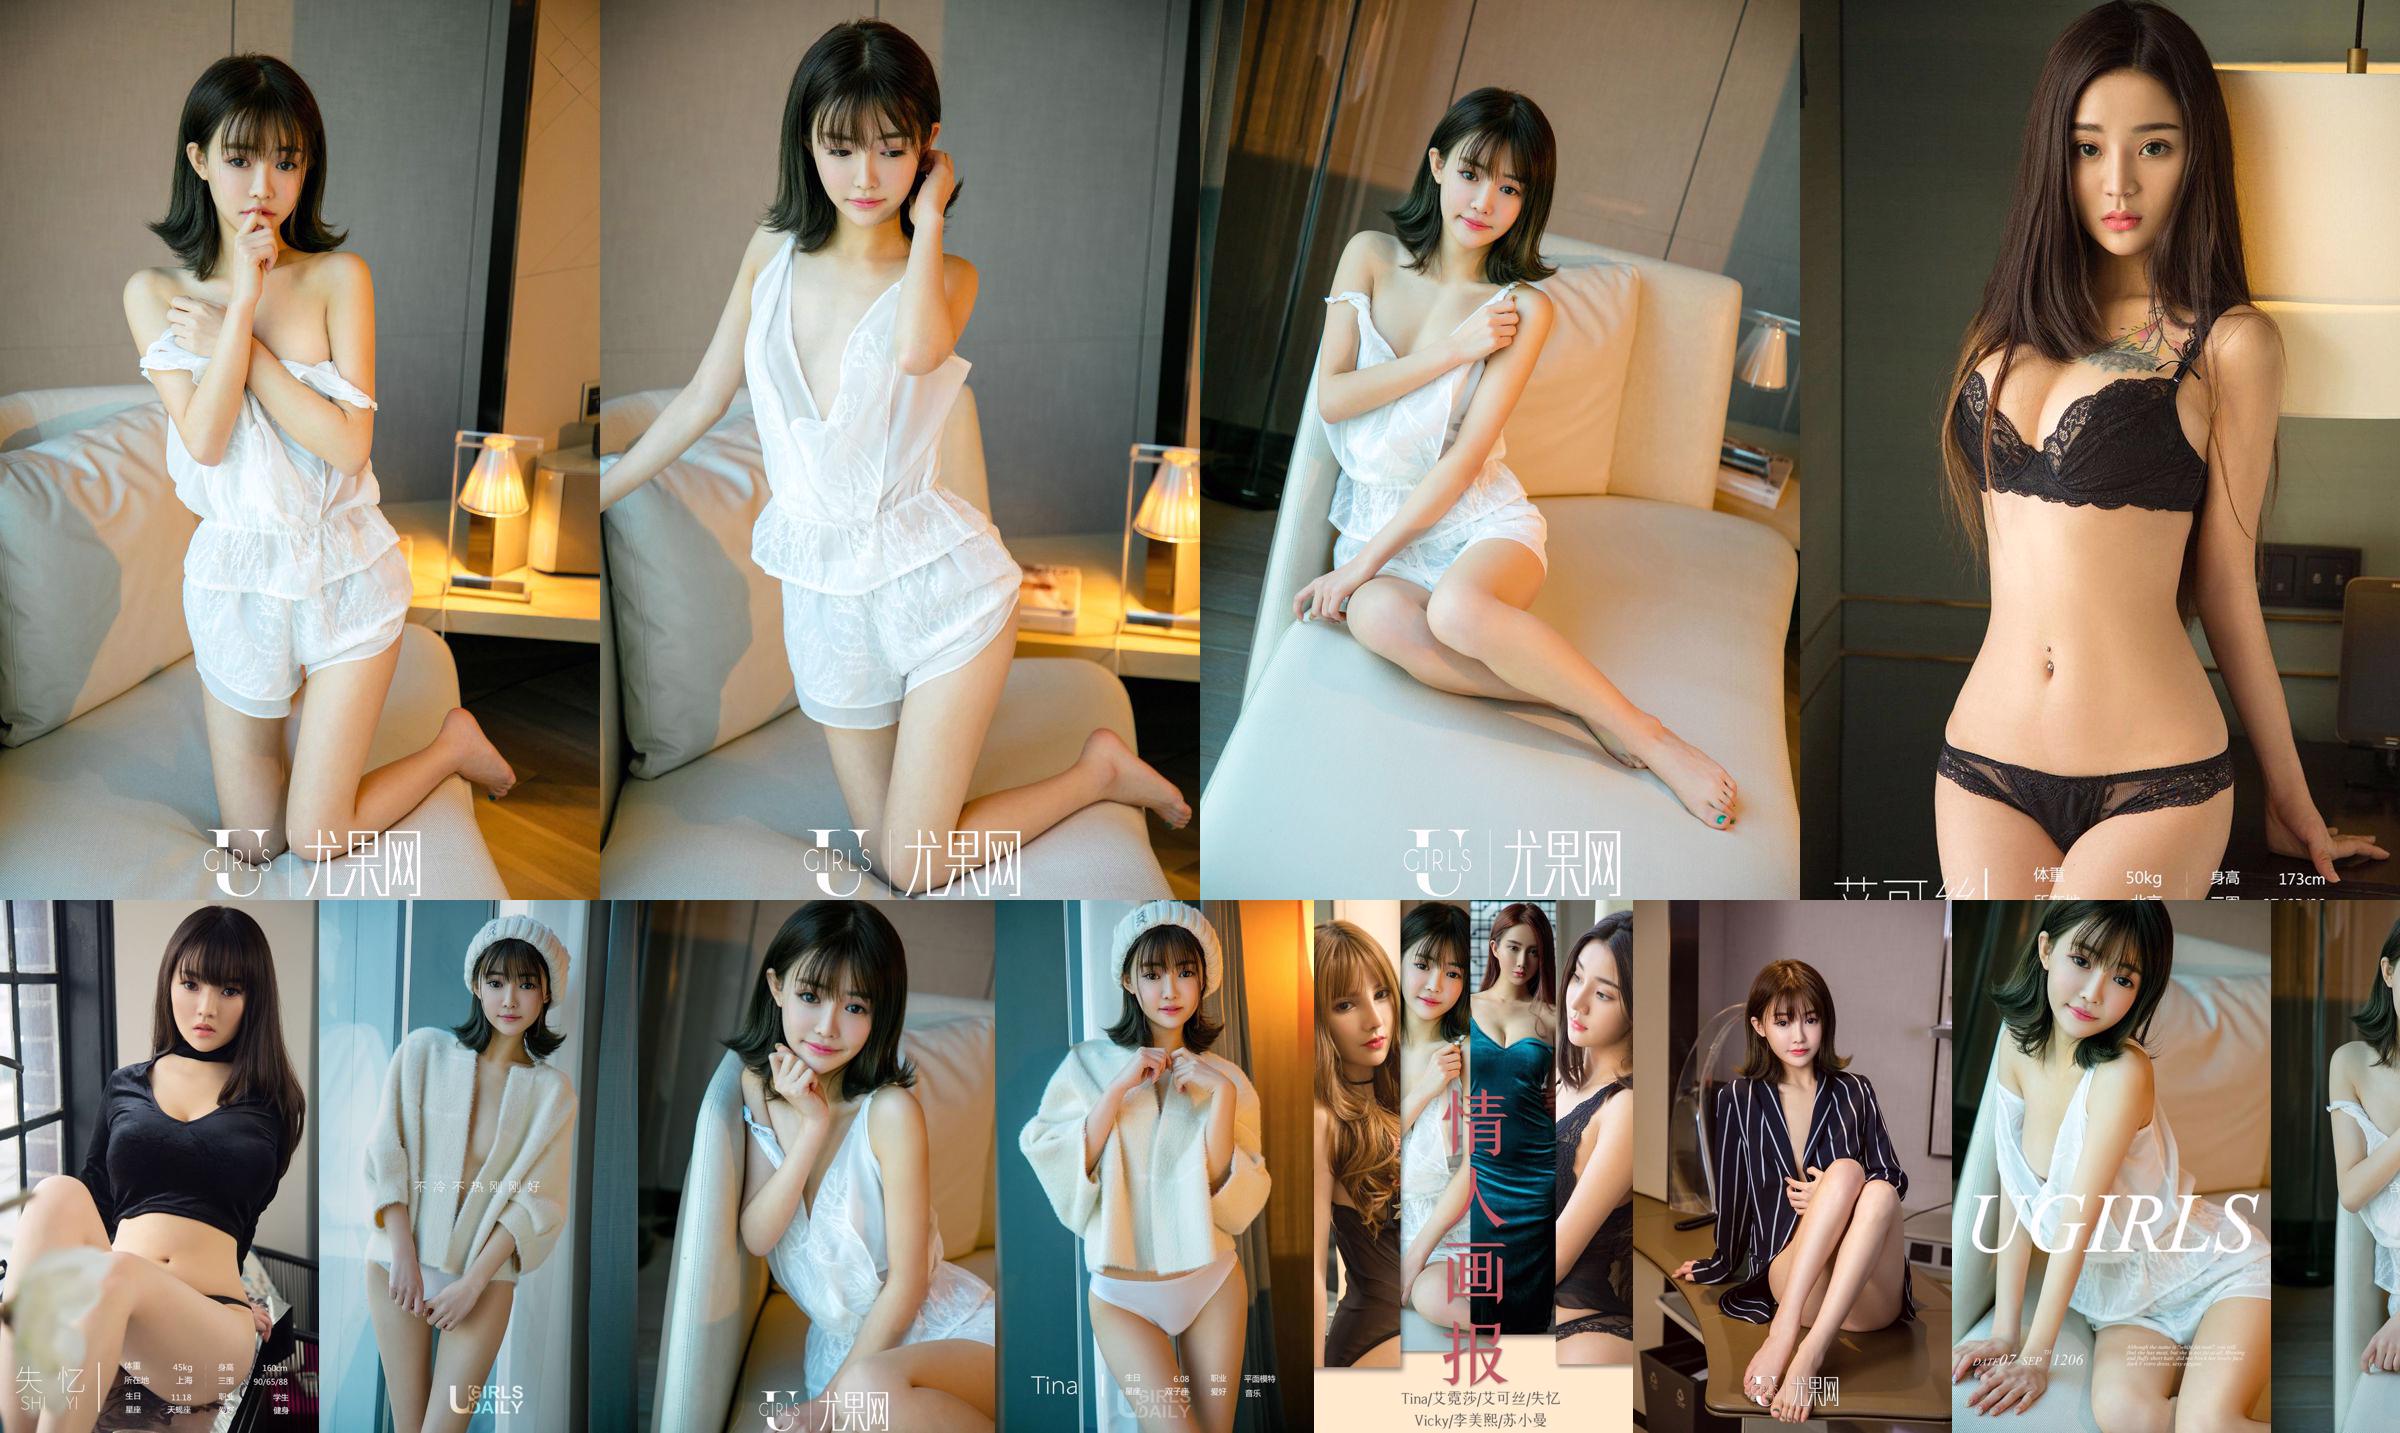 Tina "The Little Fairy with High Value" [Ugirls] U324 No.b408e3 Page 4